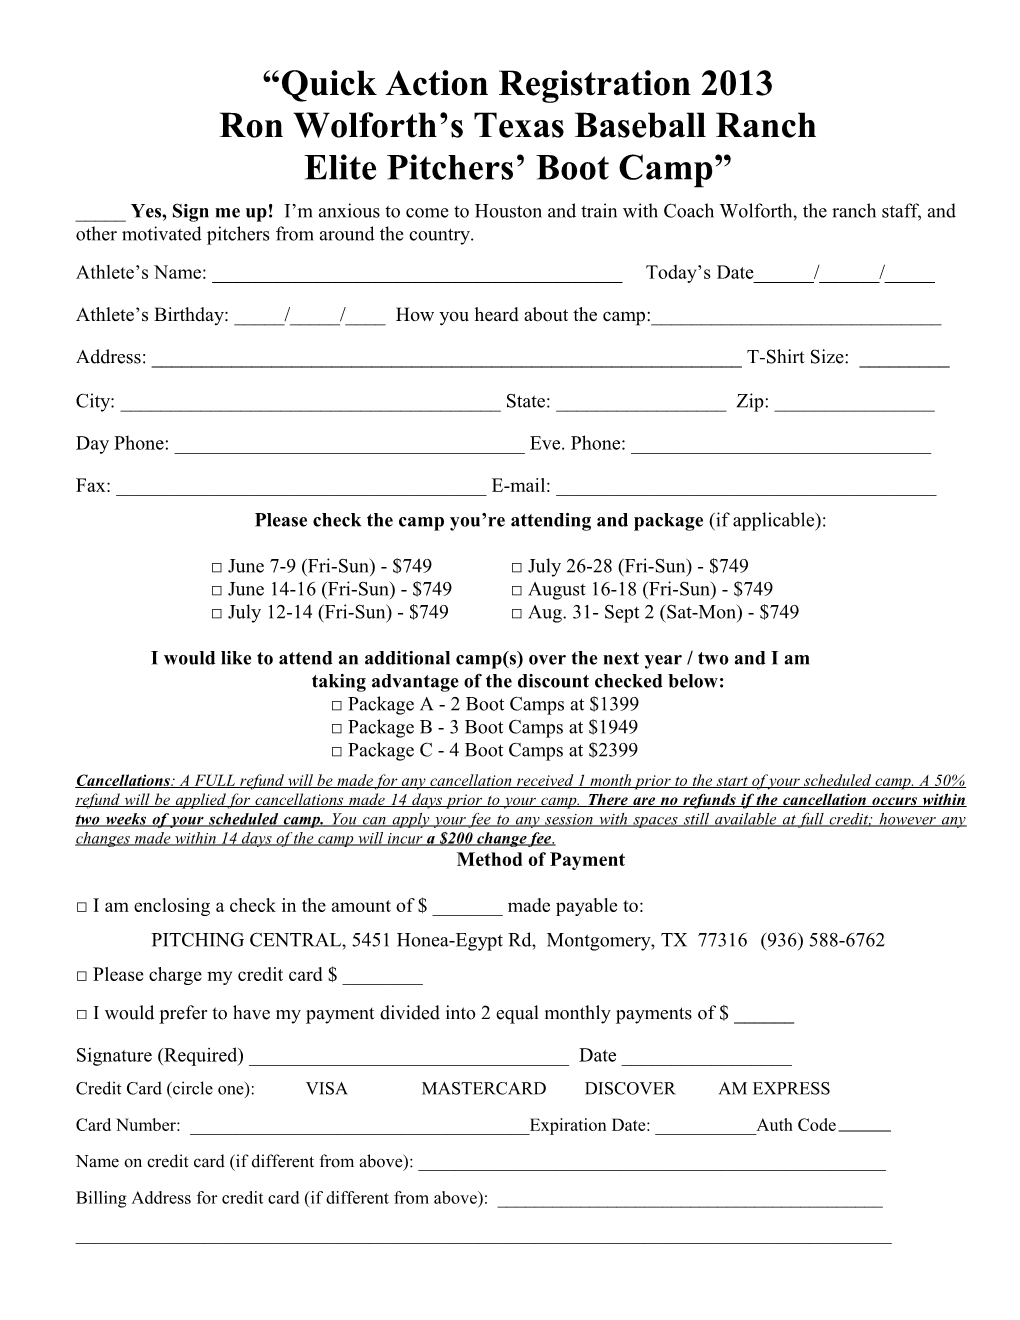 Registration Form for the Elite Pitchers Boot Camp